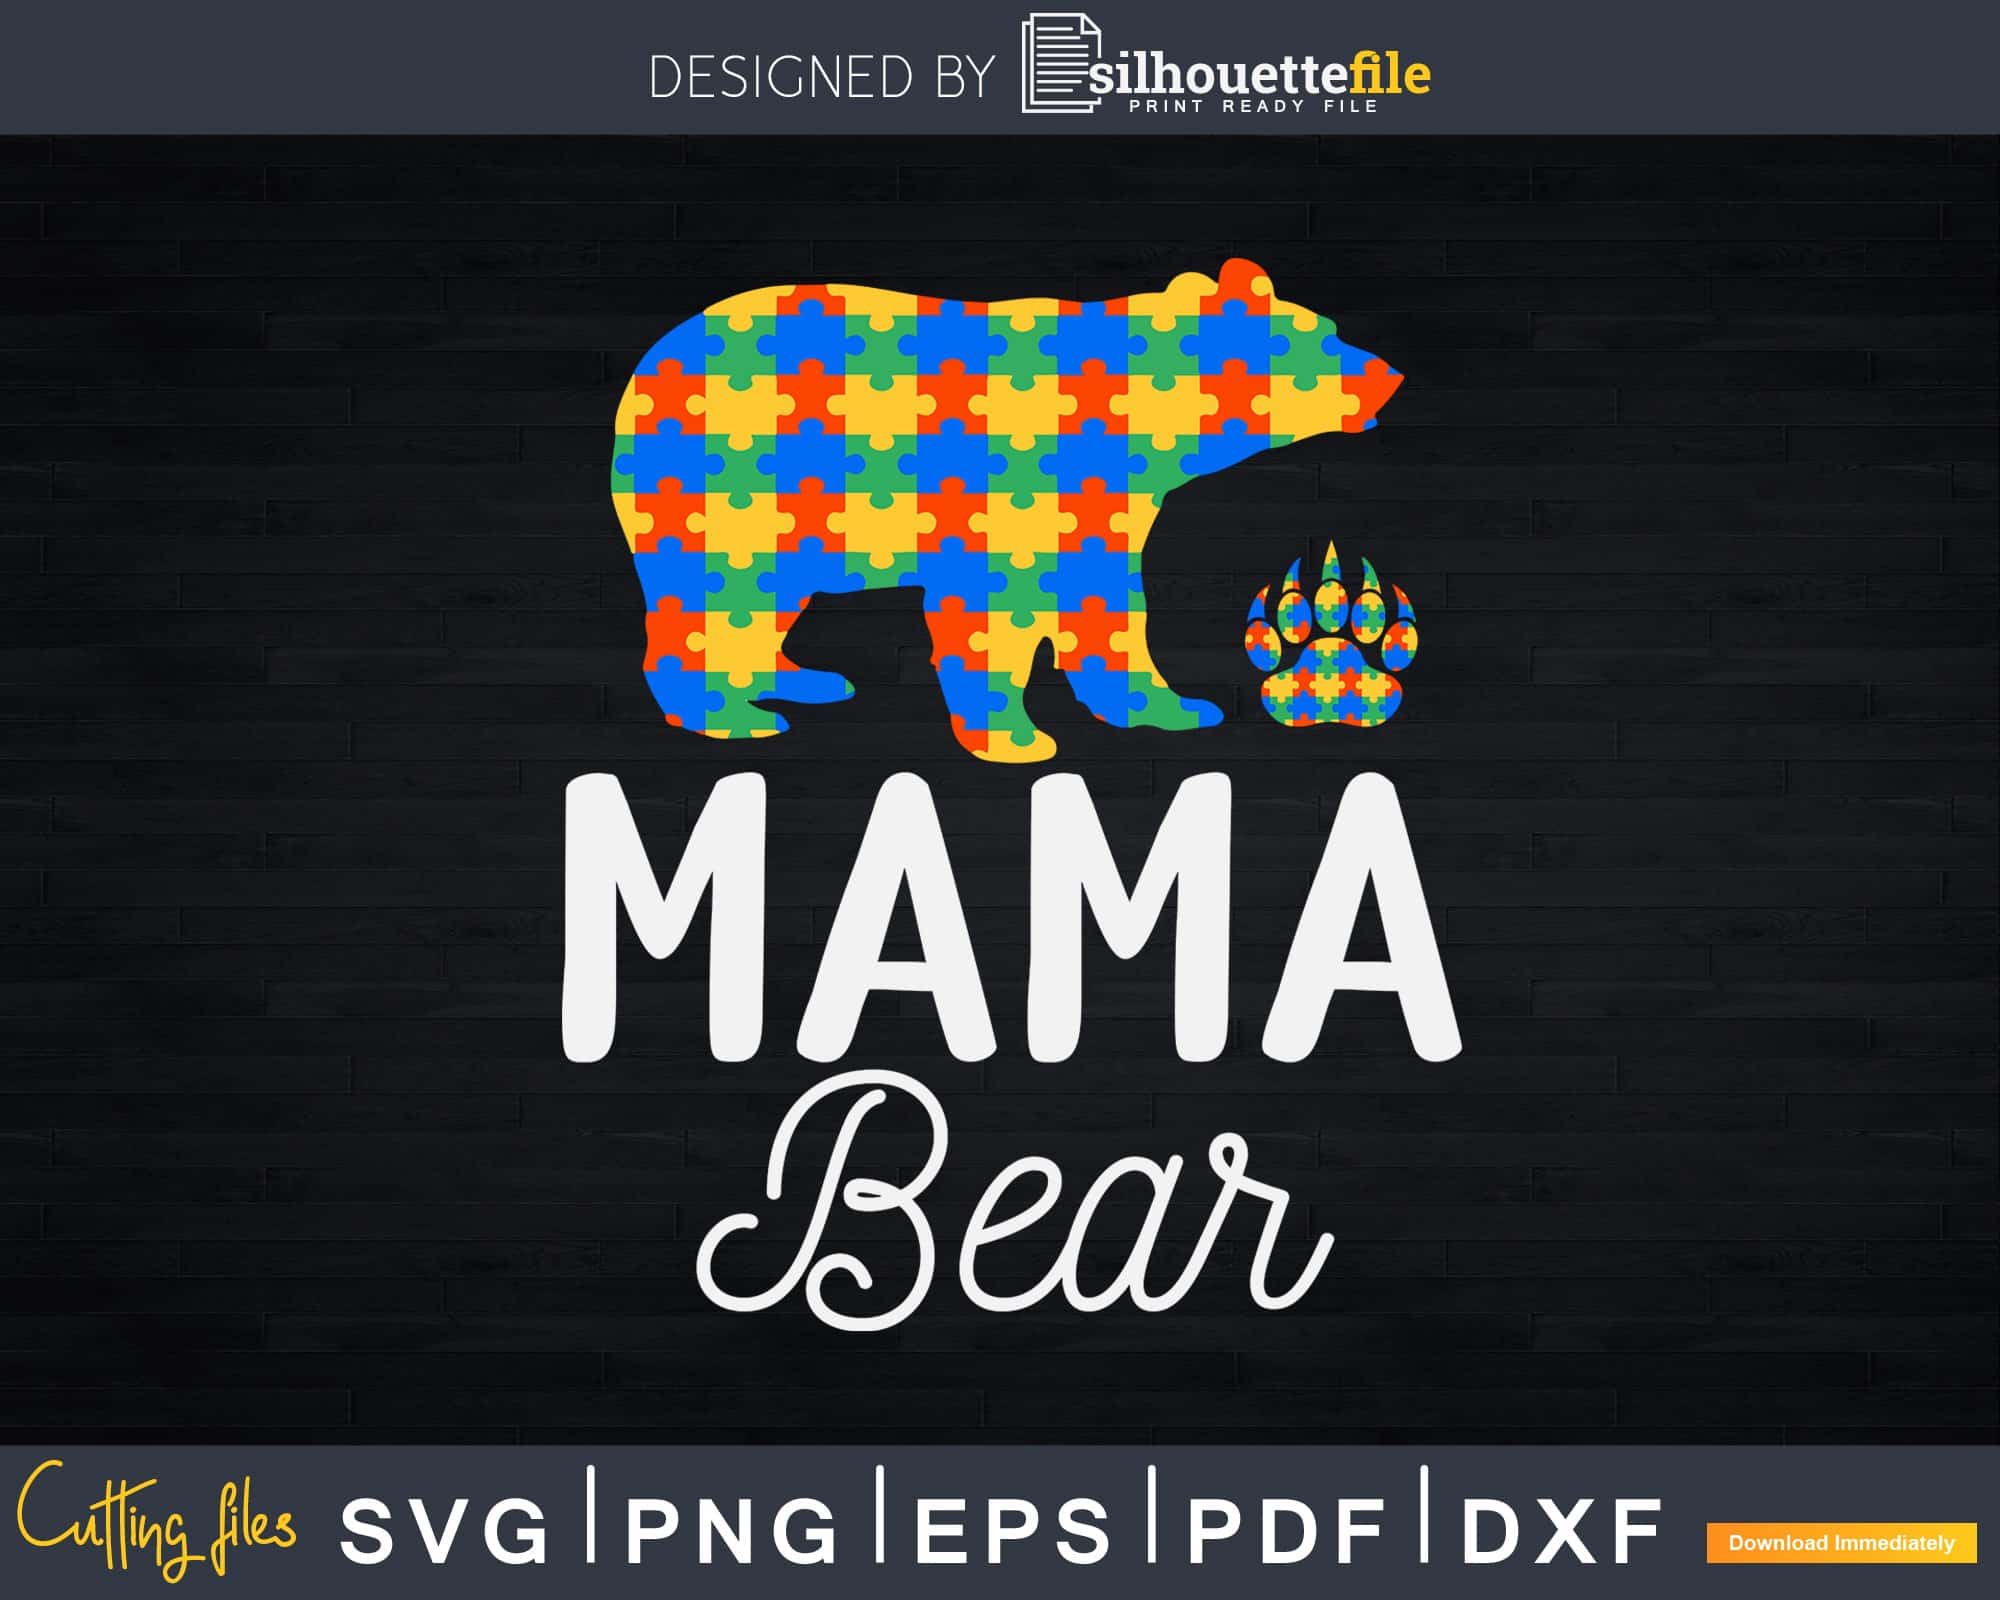 Download Mama Bear Autism Awareness Mommy Puzzle Svg Dxf Png Design Silhouettefile